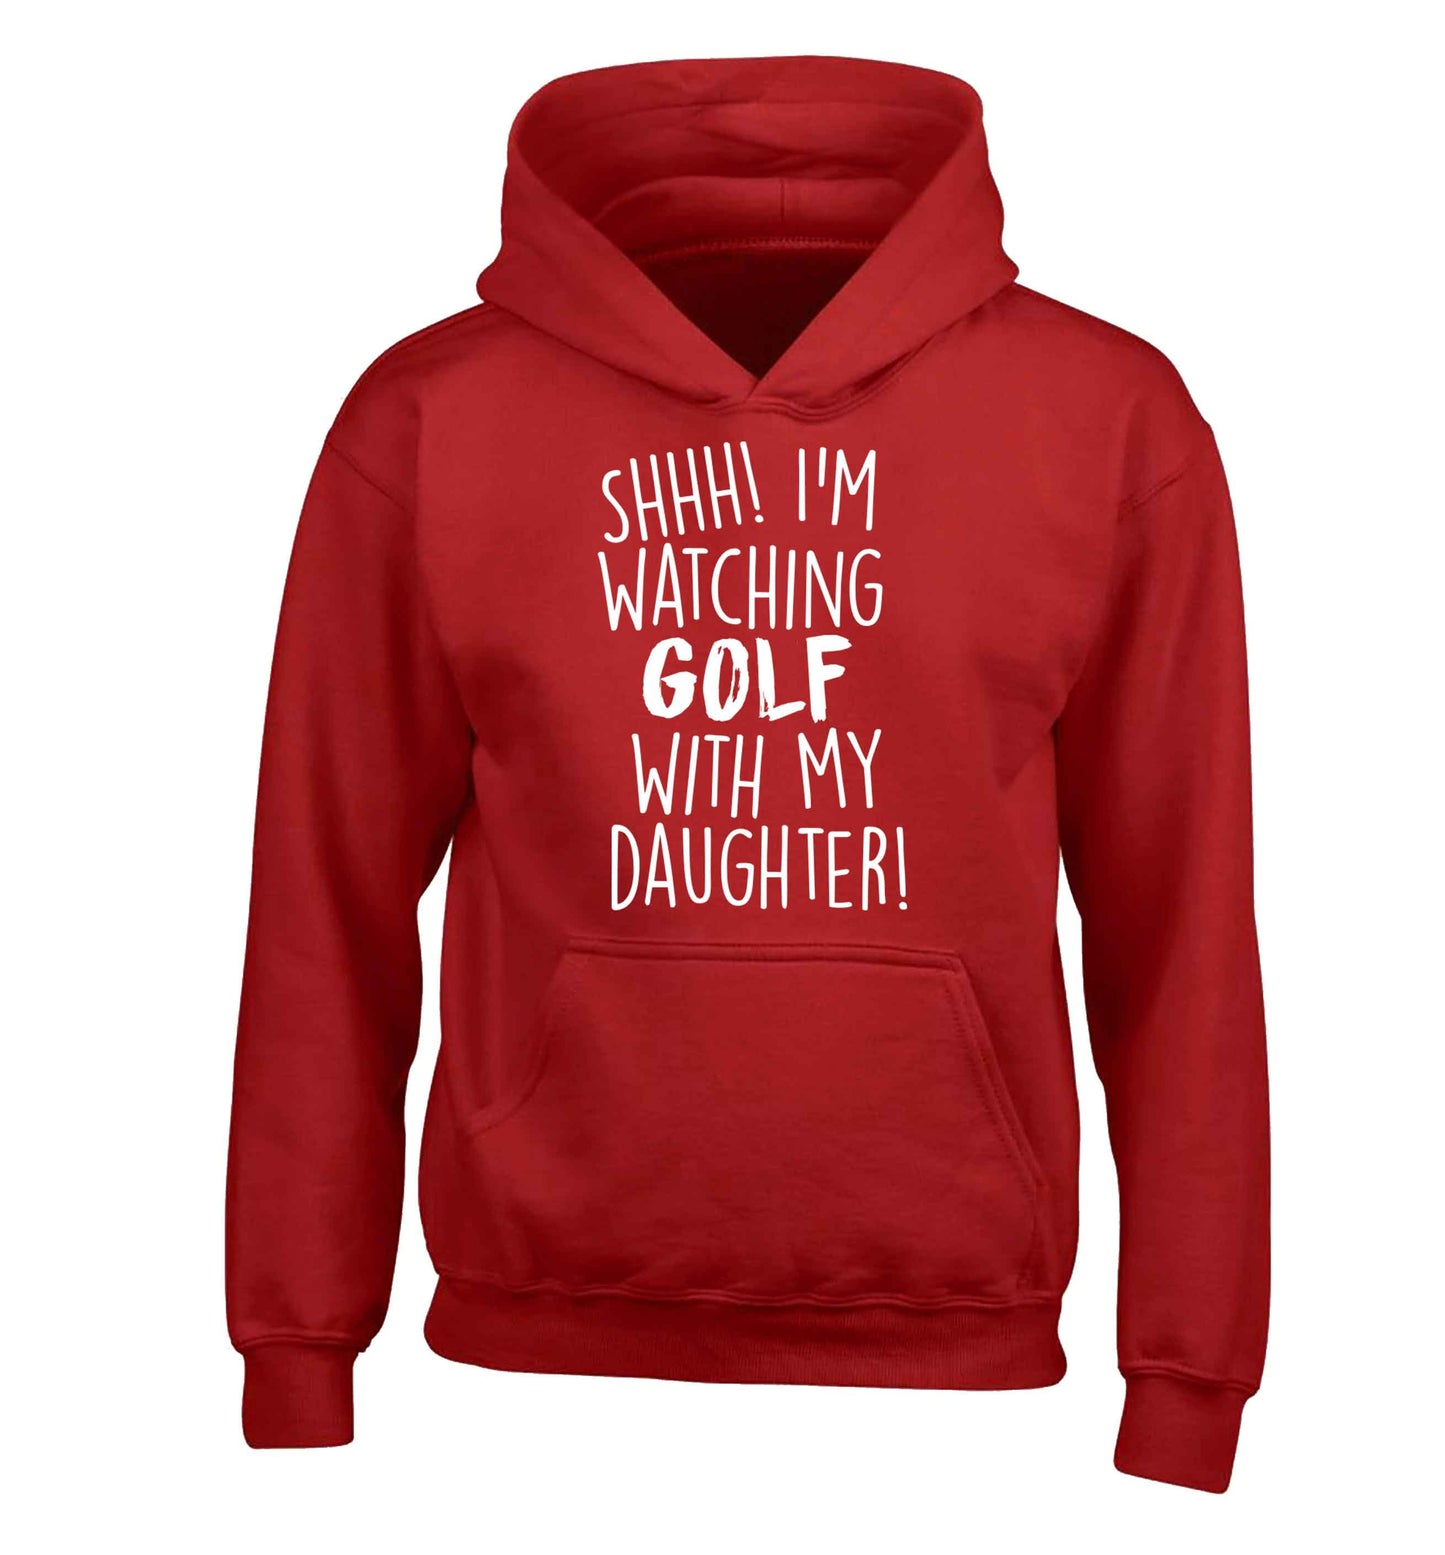 Shh I'm watching golf with my daughter children's red hoodie 12-13 Years